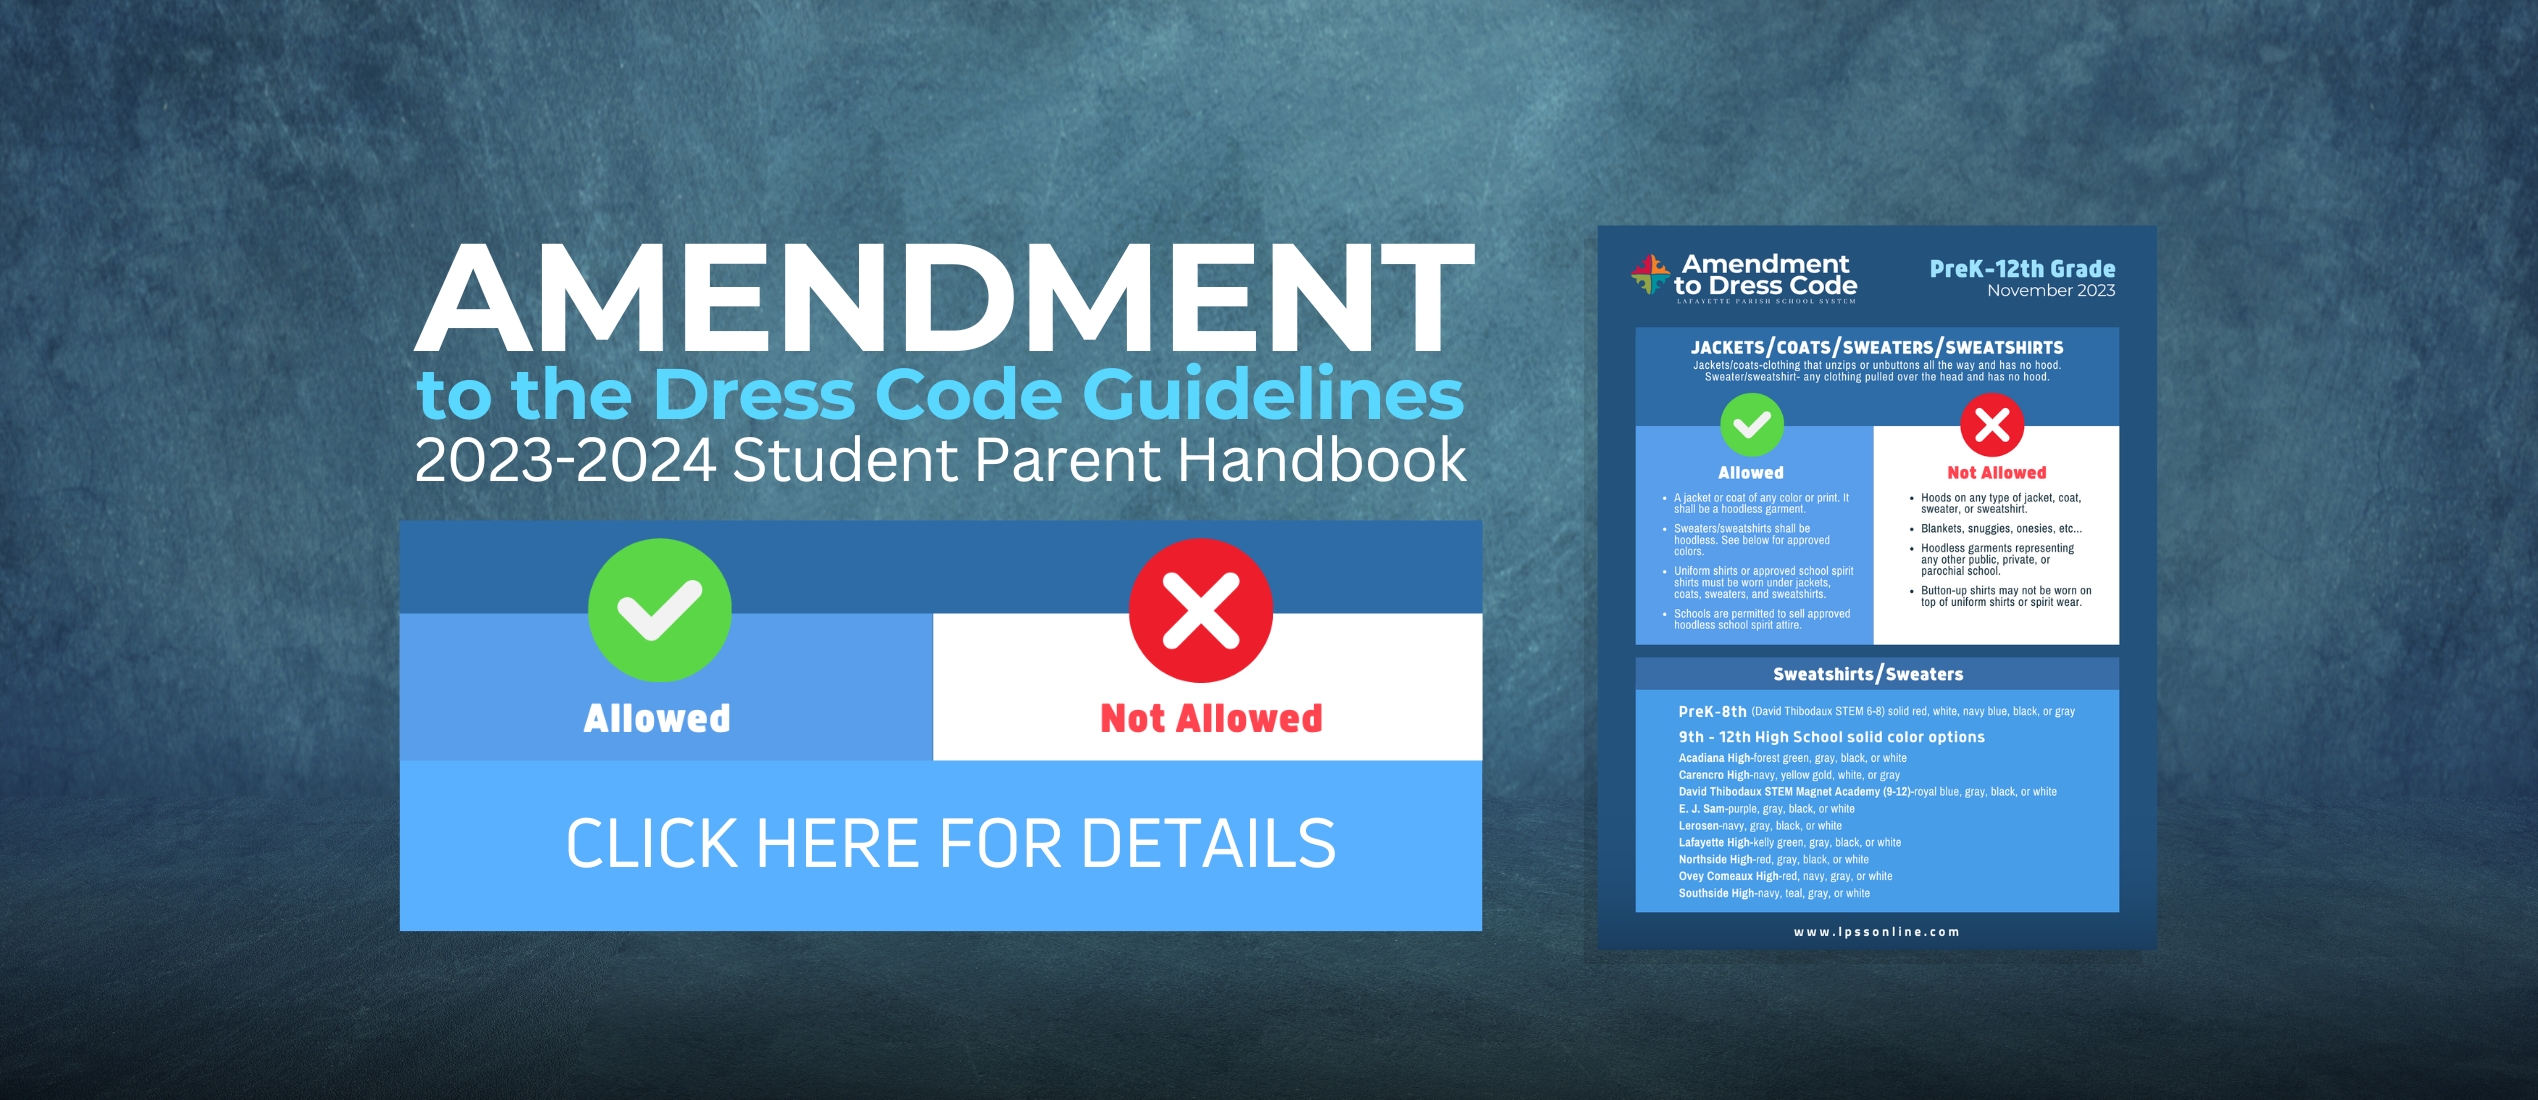 Amendment to the Dress Code Guidelines in the 2023-2024 Student Parent Handbook